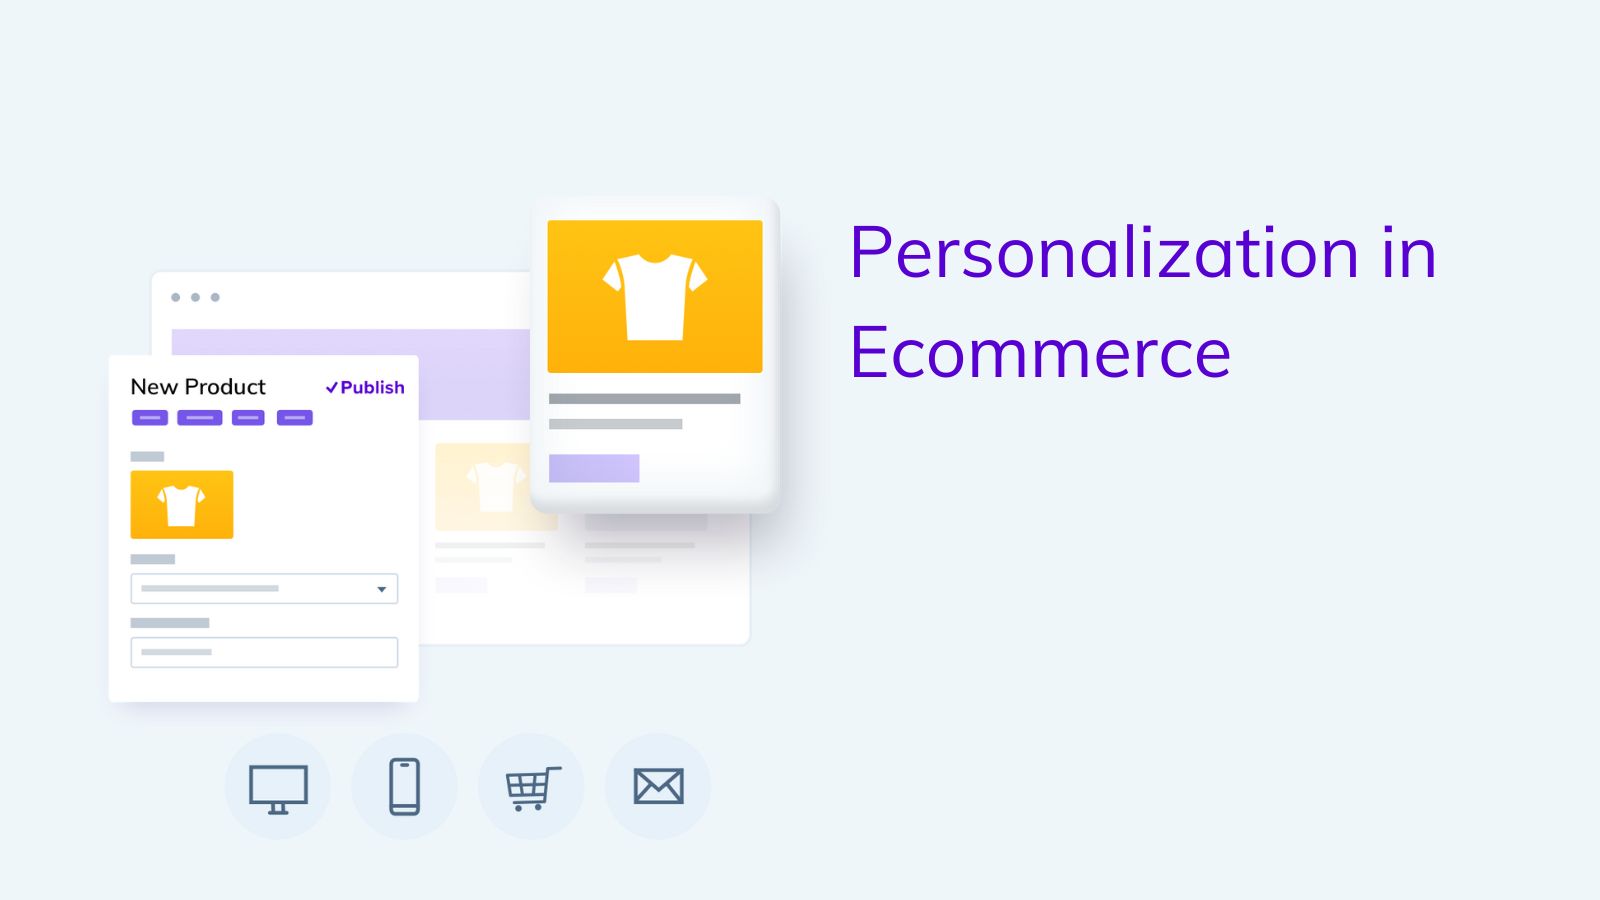 Personalization in ecommerce on agilitycms.com